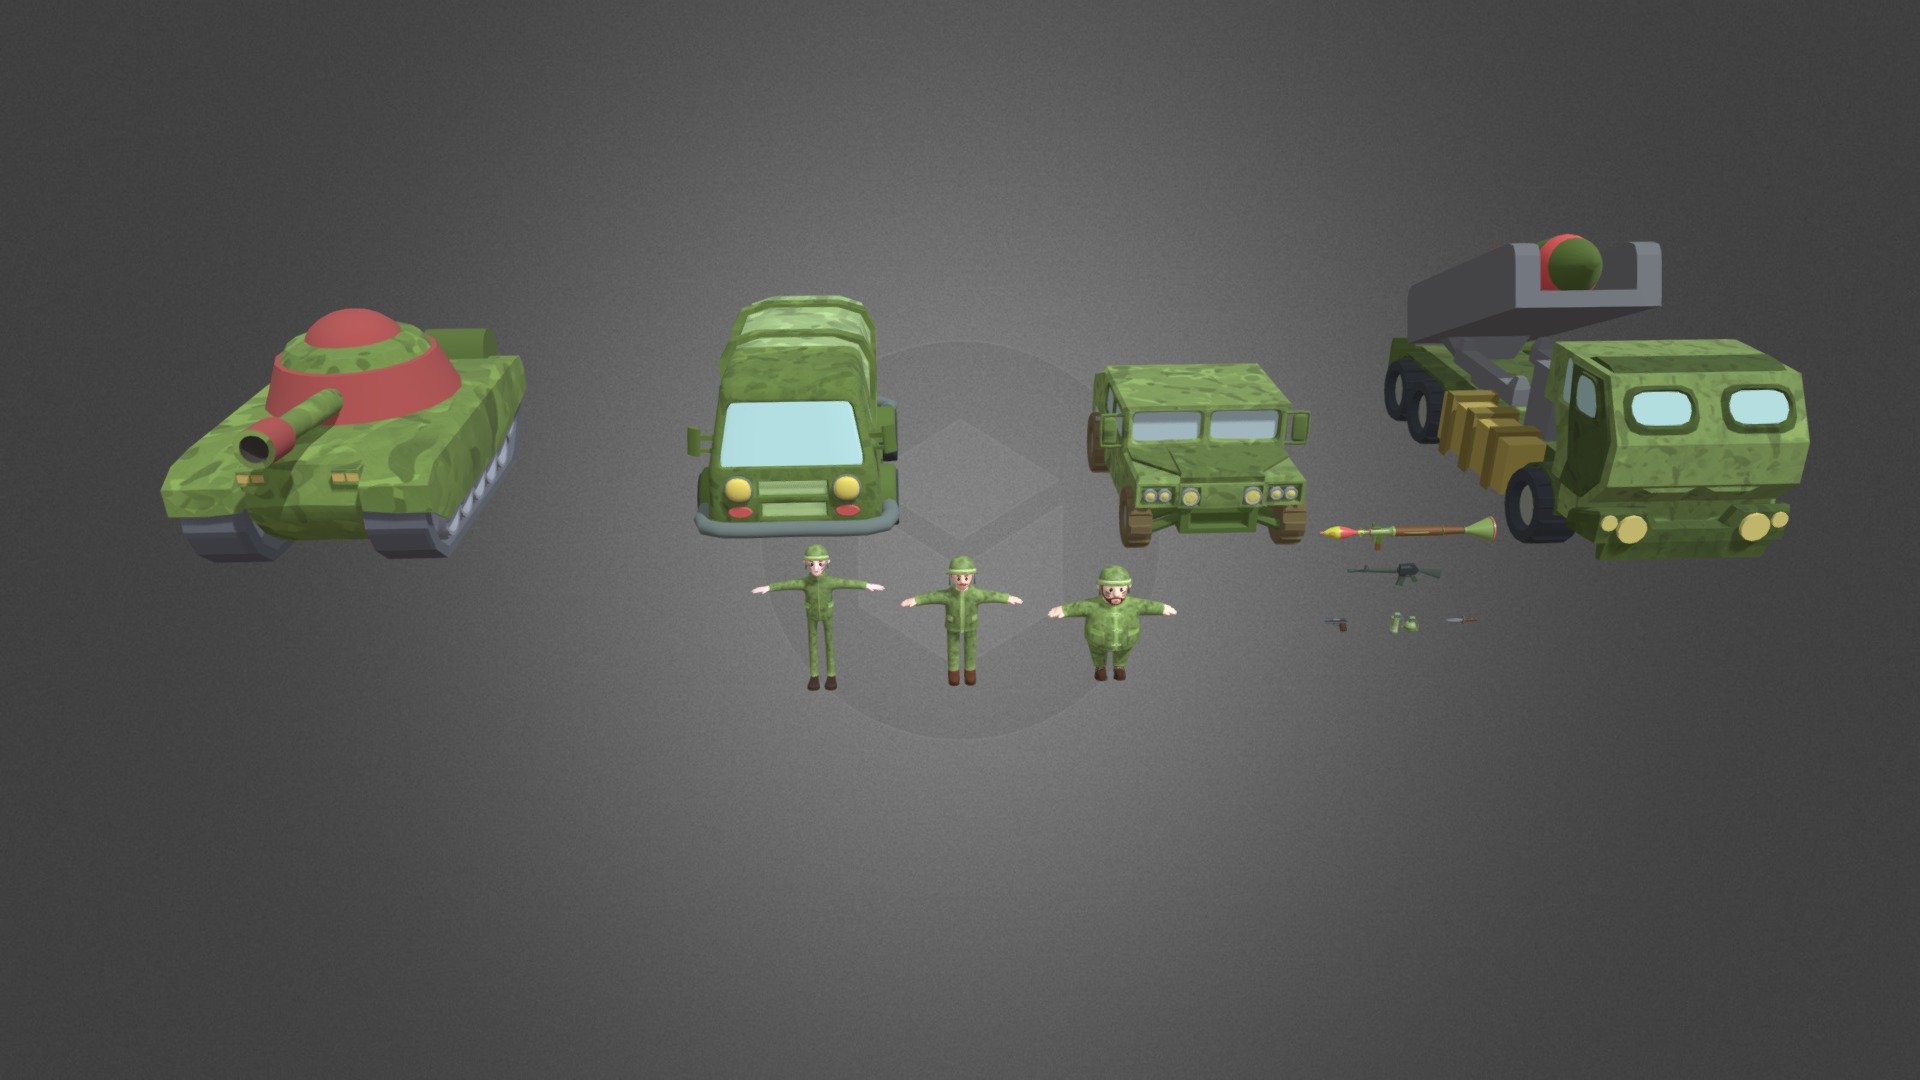 Comprehensive asset pack for your next military-themed game.
This Cartoon Military Soldier Characters with Rig &amp; Blendshapes Weapons Vehicles Pack has everything you need to get started.

With 3 soldiers, weapons, and vehicles at your disposal, you'll be able to create the perfect game world for your players to explore. The characters are fully rigged and come with a variety of blend shapes, giving you complete control over their appearance. And the vehicles are detailed, ensuring that your players will feel like they're in the thick of the action.

This asset collection has everything you need for your next military-themed game. 

So why wait? Grab this awesome asset bundle today and start bringing your visions to life with the help of these incredible 3D models!

We look forward to your feedback so we can create more assets for YOU! - Cartoon Military Pack - Buy Royalty Free 3D model by HayqArt 3d model